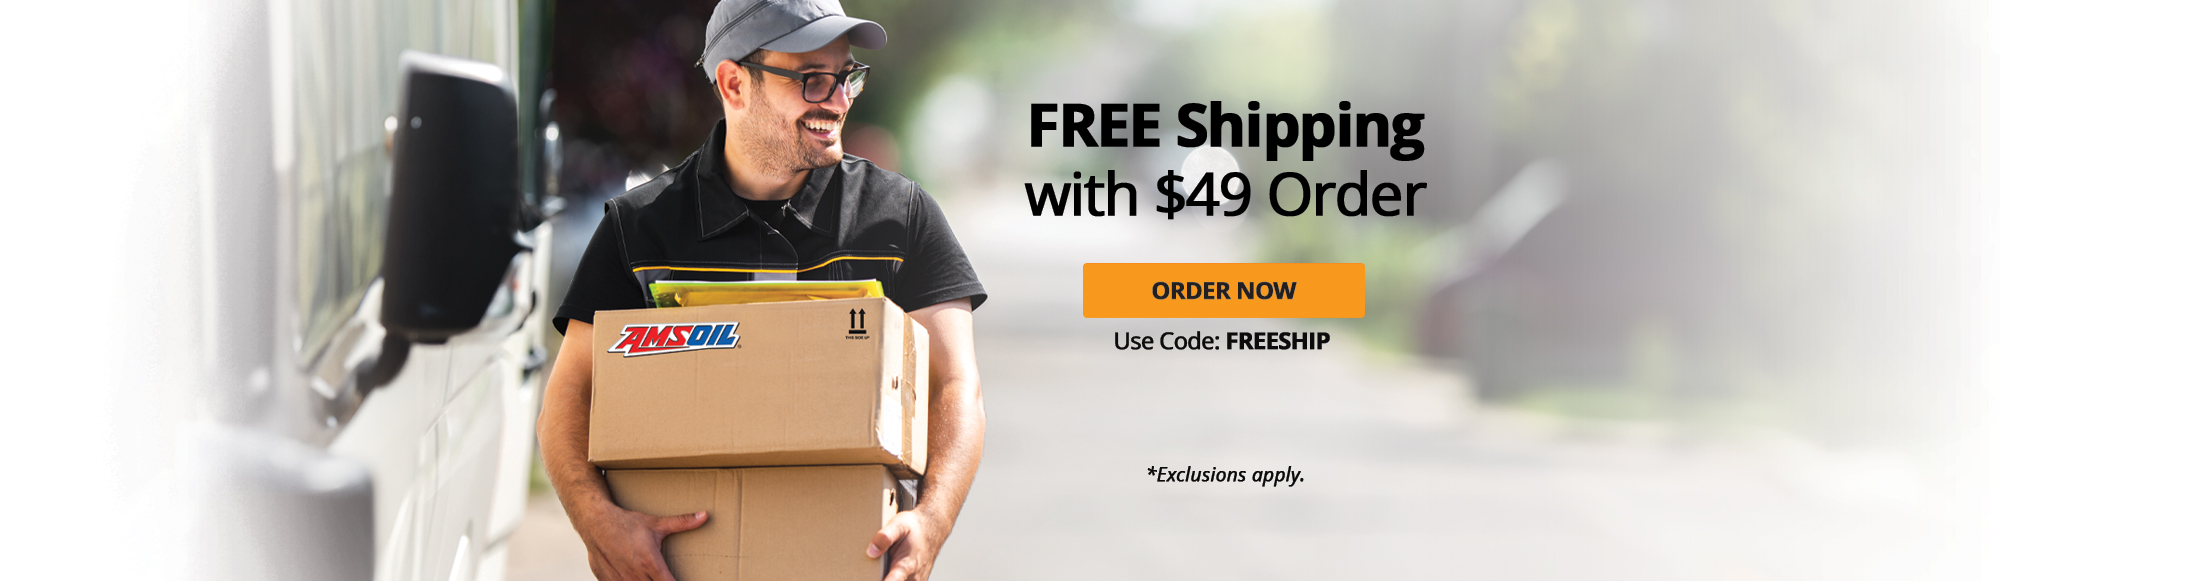 Free Shipping with $49 order. Order now. Use Code: FREESHIP. *Exclusions apply.